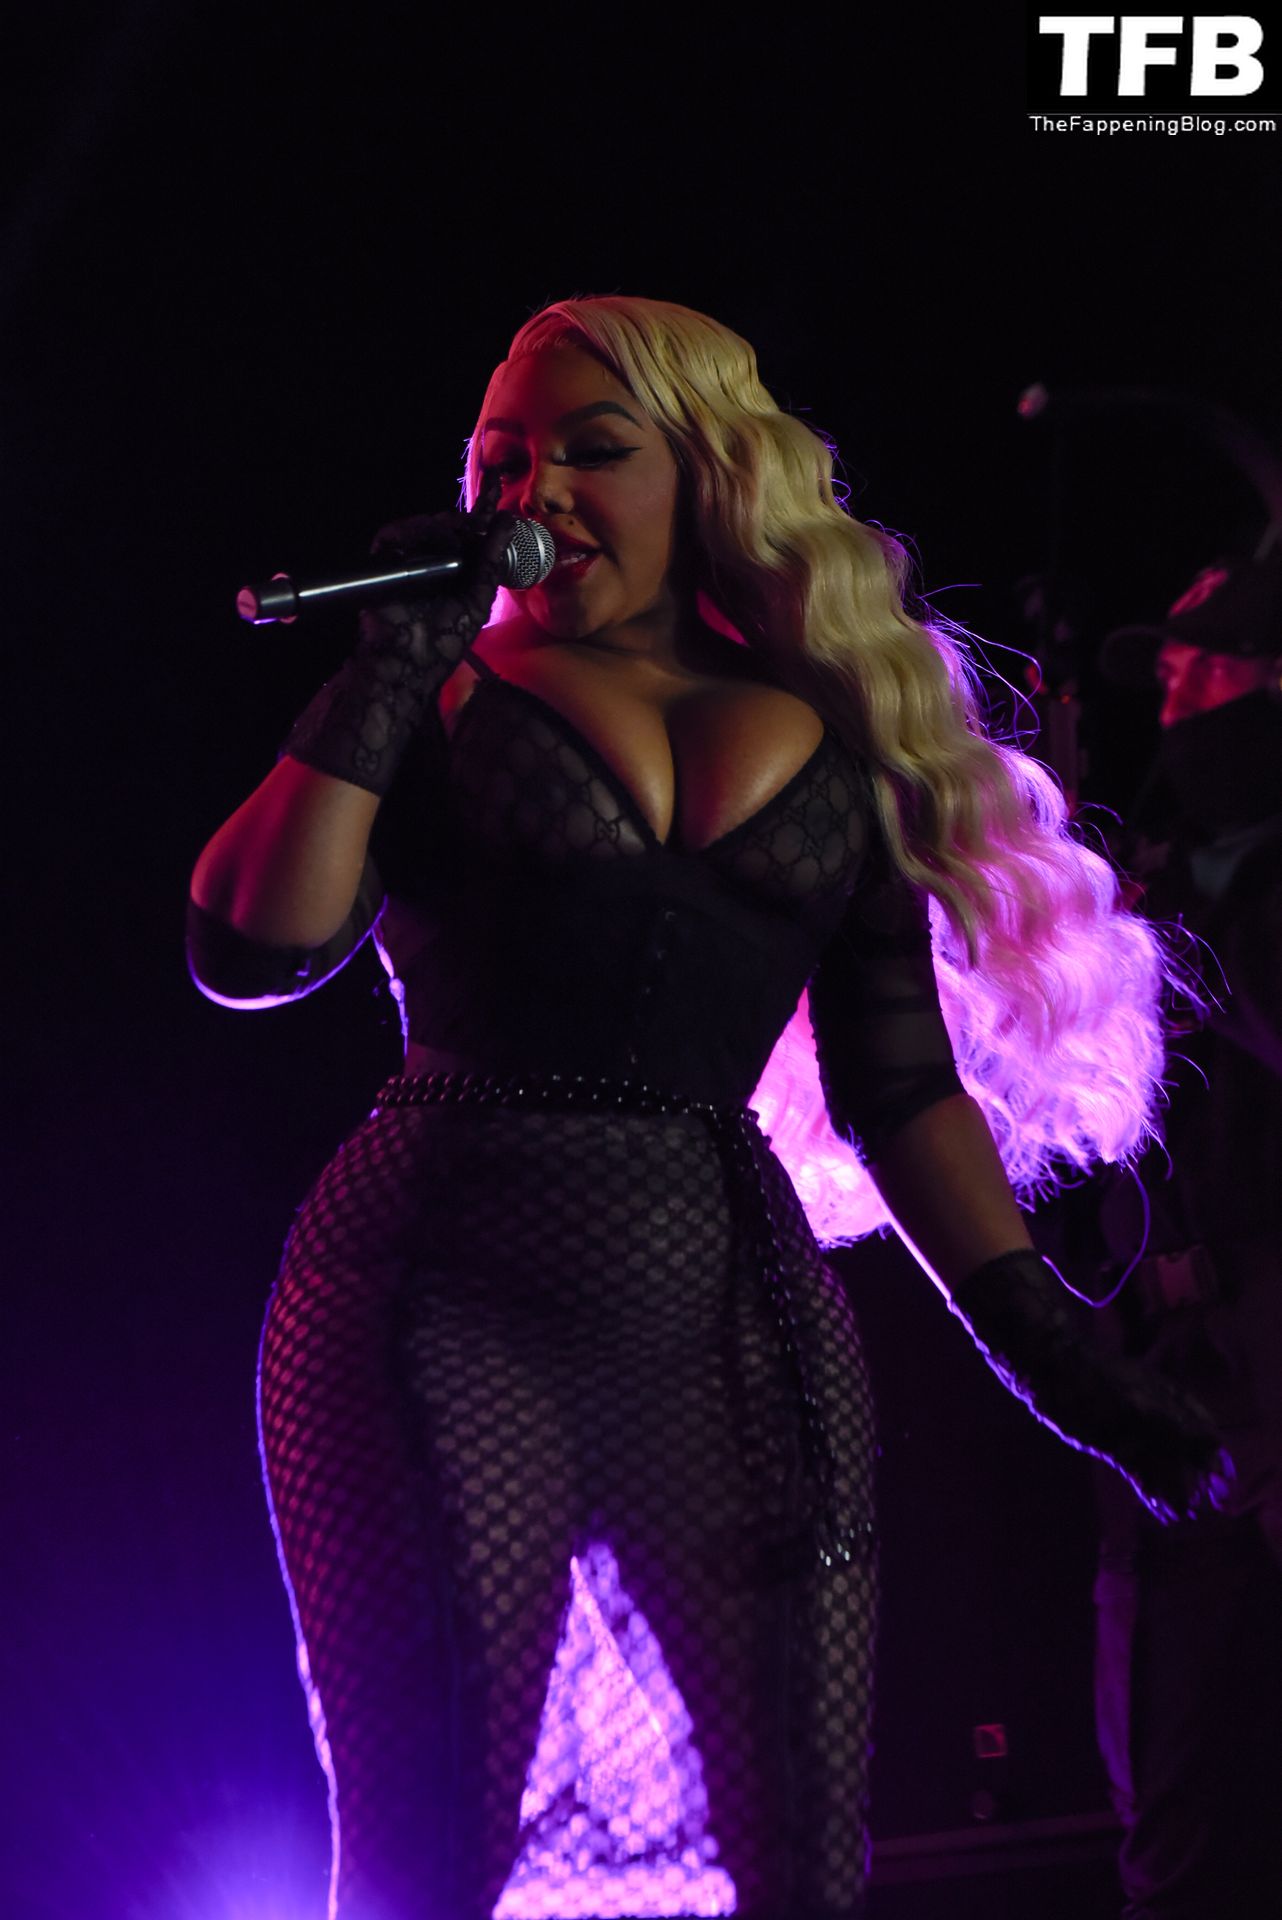 Lil-Kim-See-Through-Nudity-The-Fappening-Blog-8.jpg